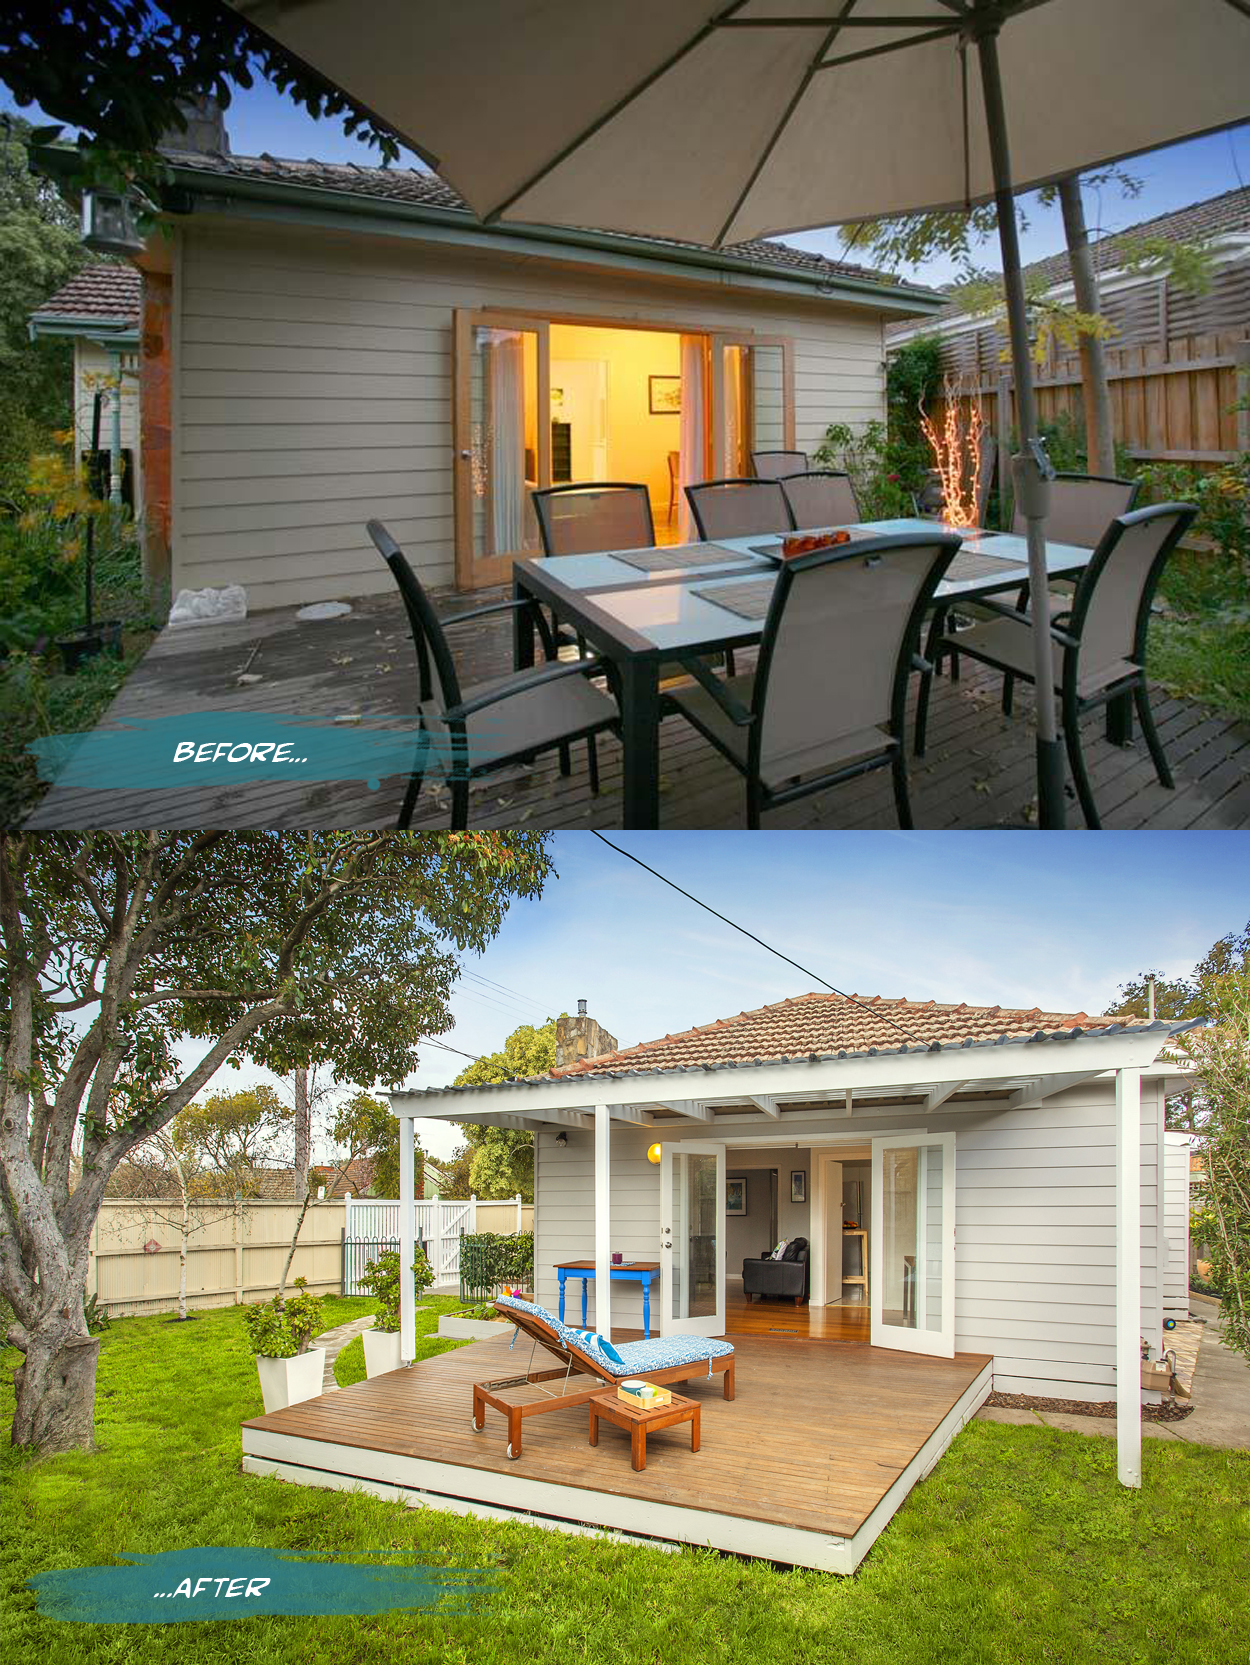 Outside deck before and after on Romona Sandon Designs blog. #interiors #beforeandafter #styling #exterior #deck #outdoors #home